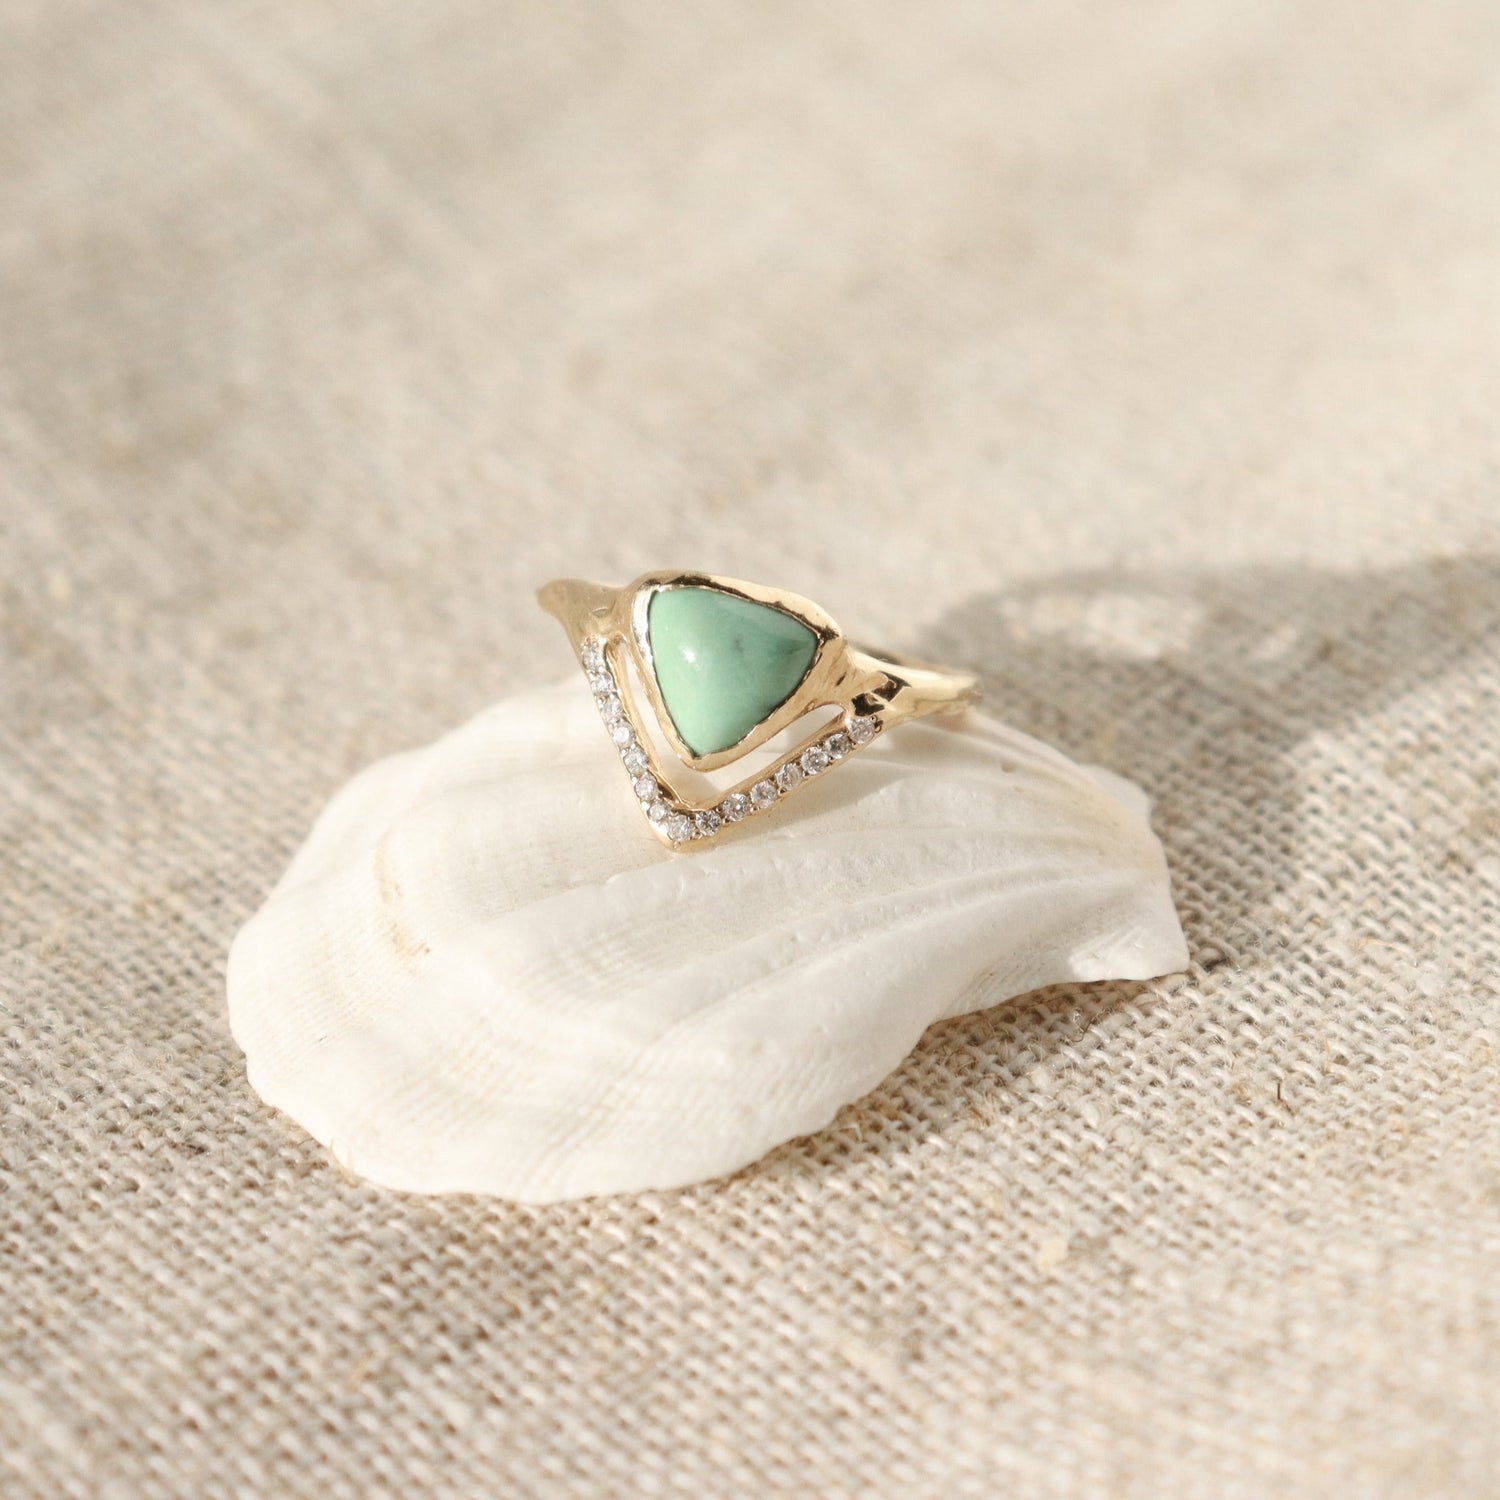 A trillion shaped variscite is bezel set with a V-shaped pave band at the base of the ring.